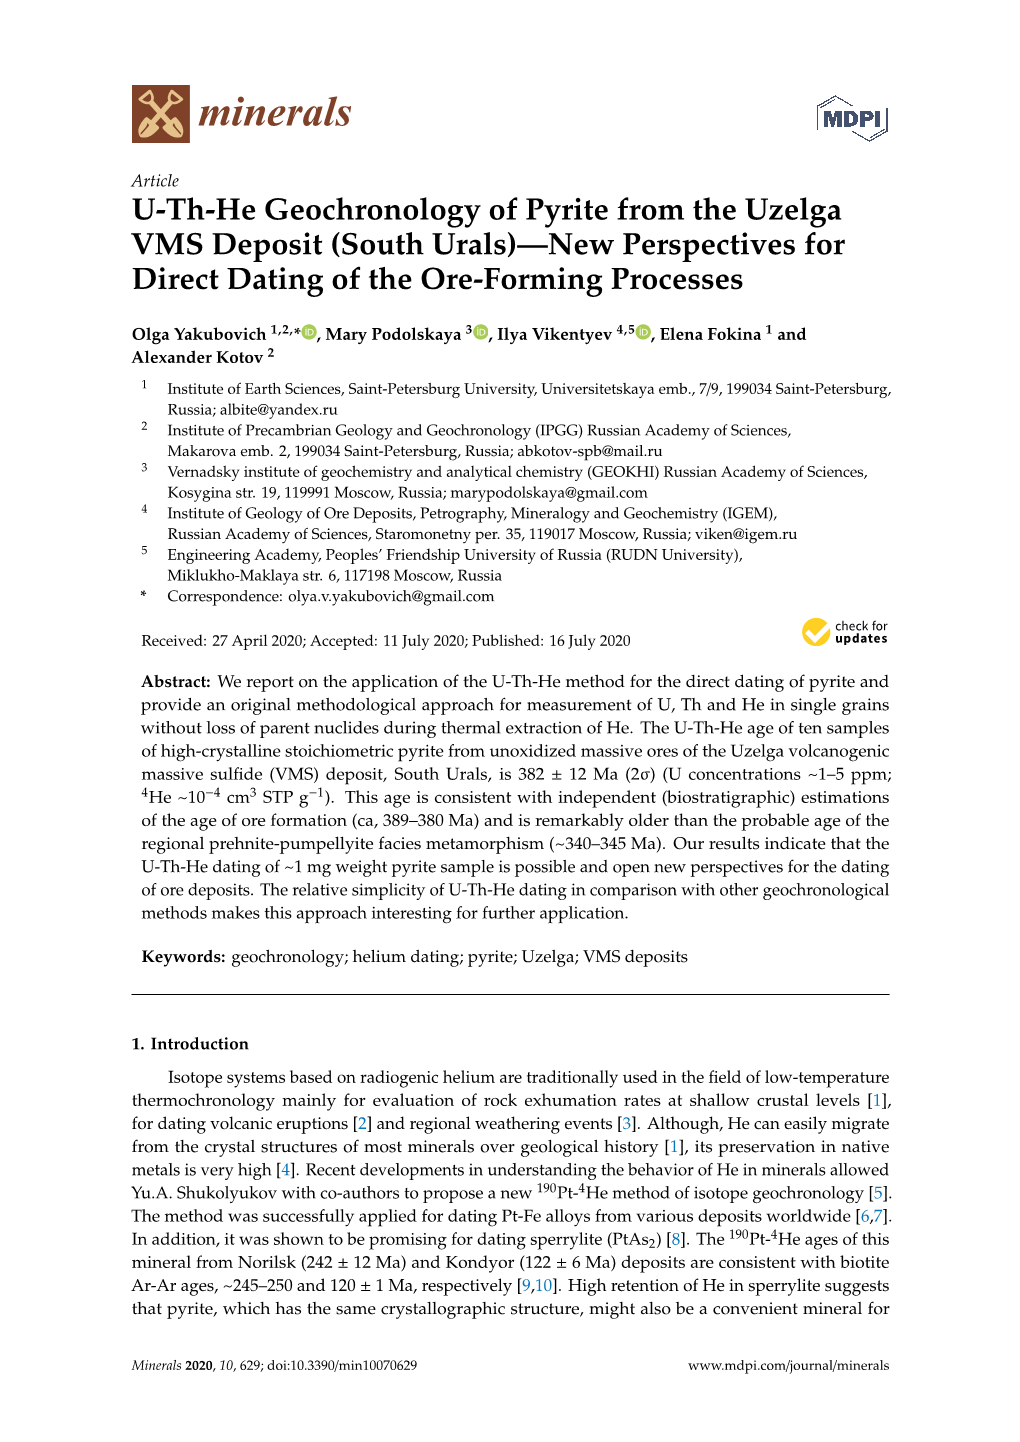 U-Th-He Geochronology of Pyrite from the Uzelga VMS Deposit (South Urals)—New Perspectives for Direct Dating of the Ore-Forming Processes